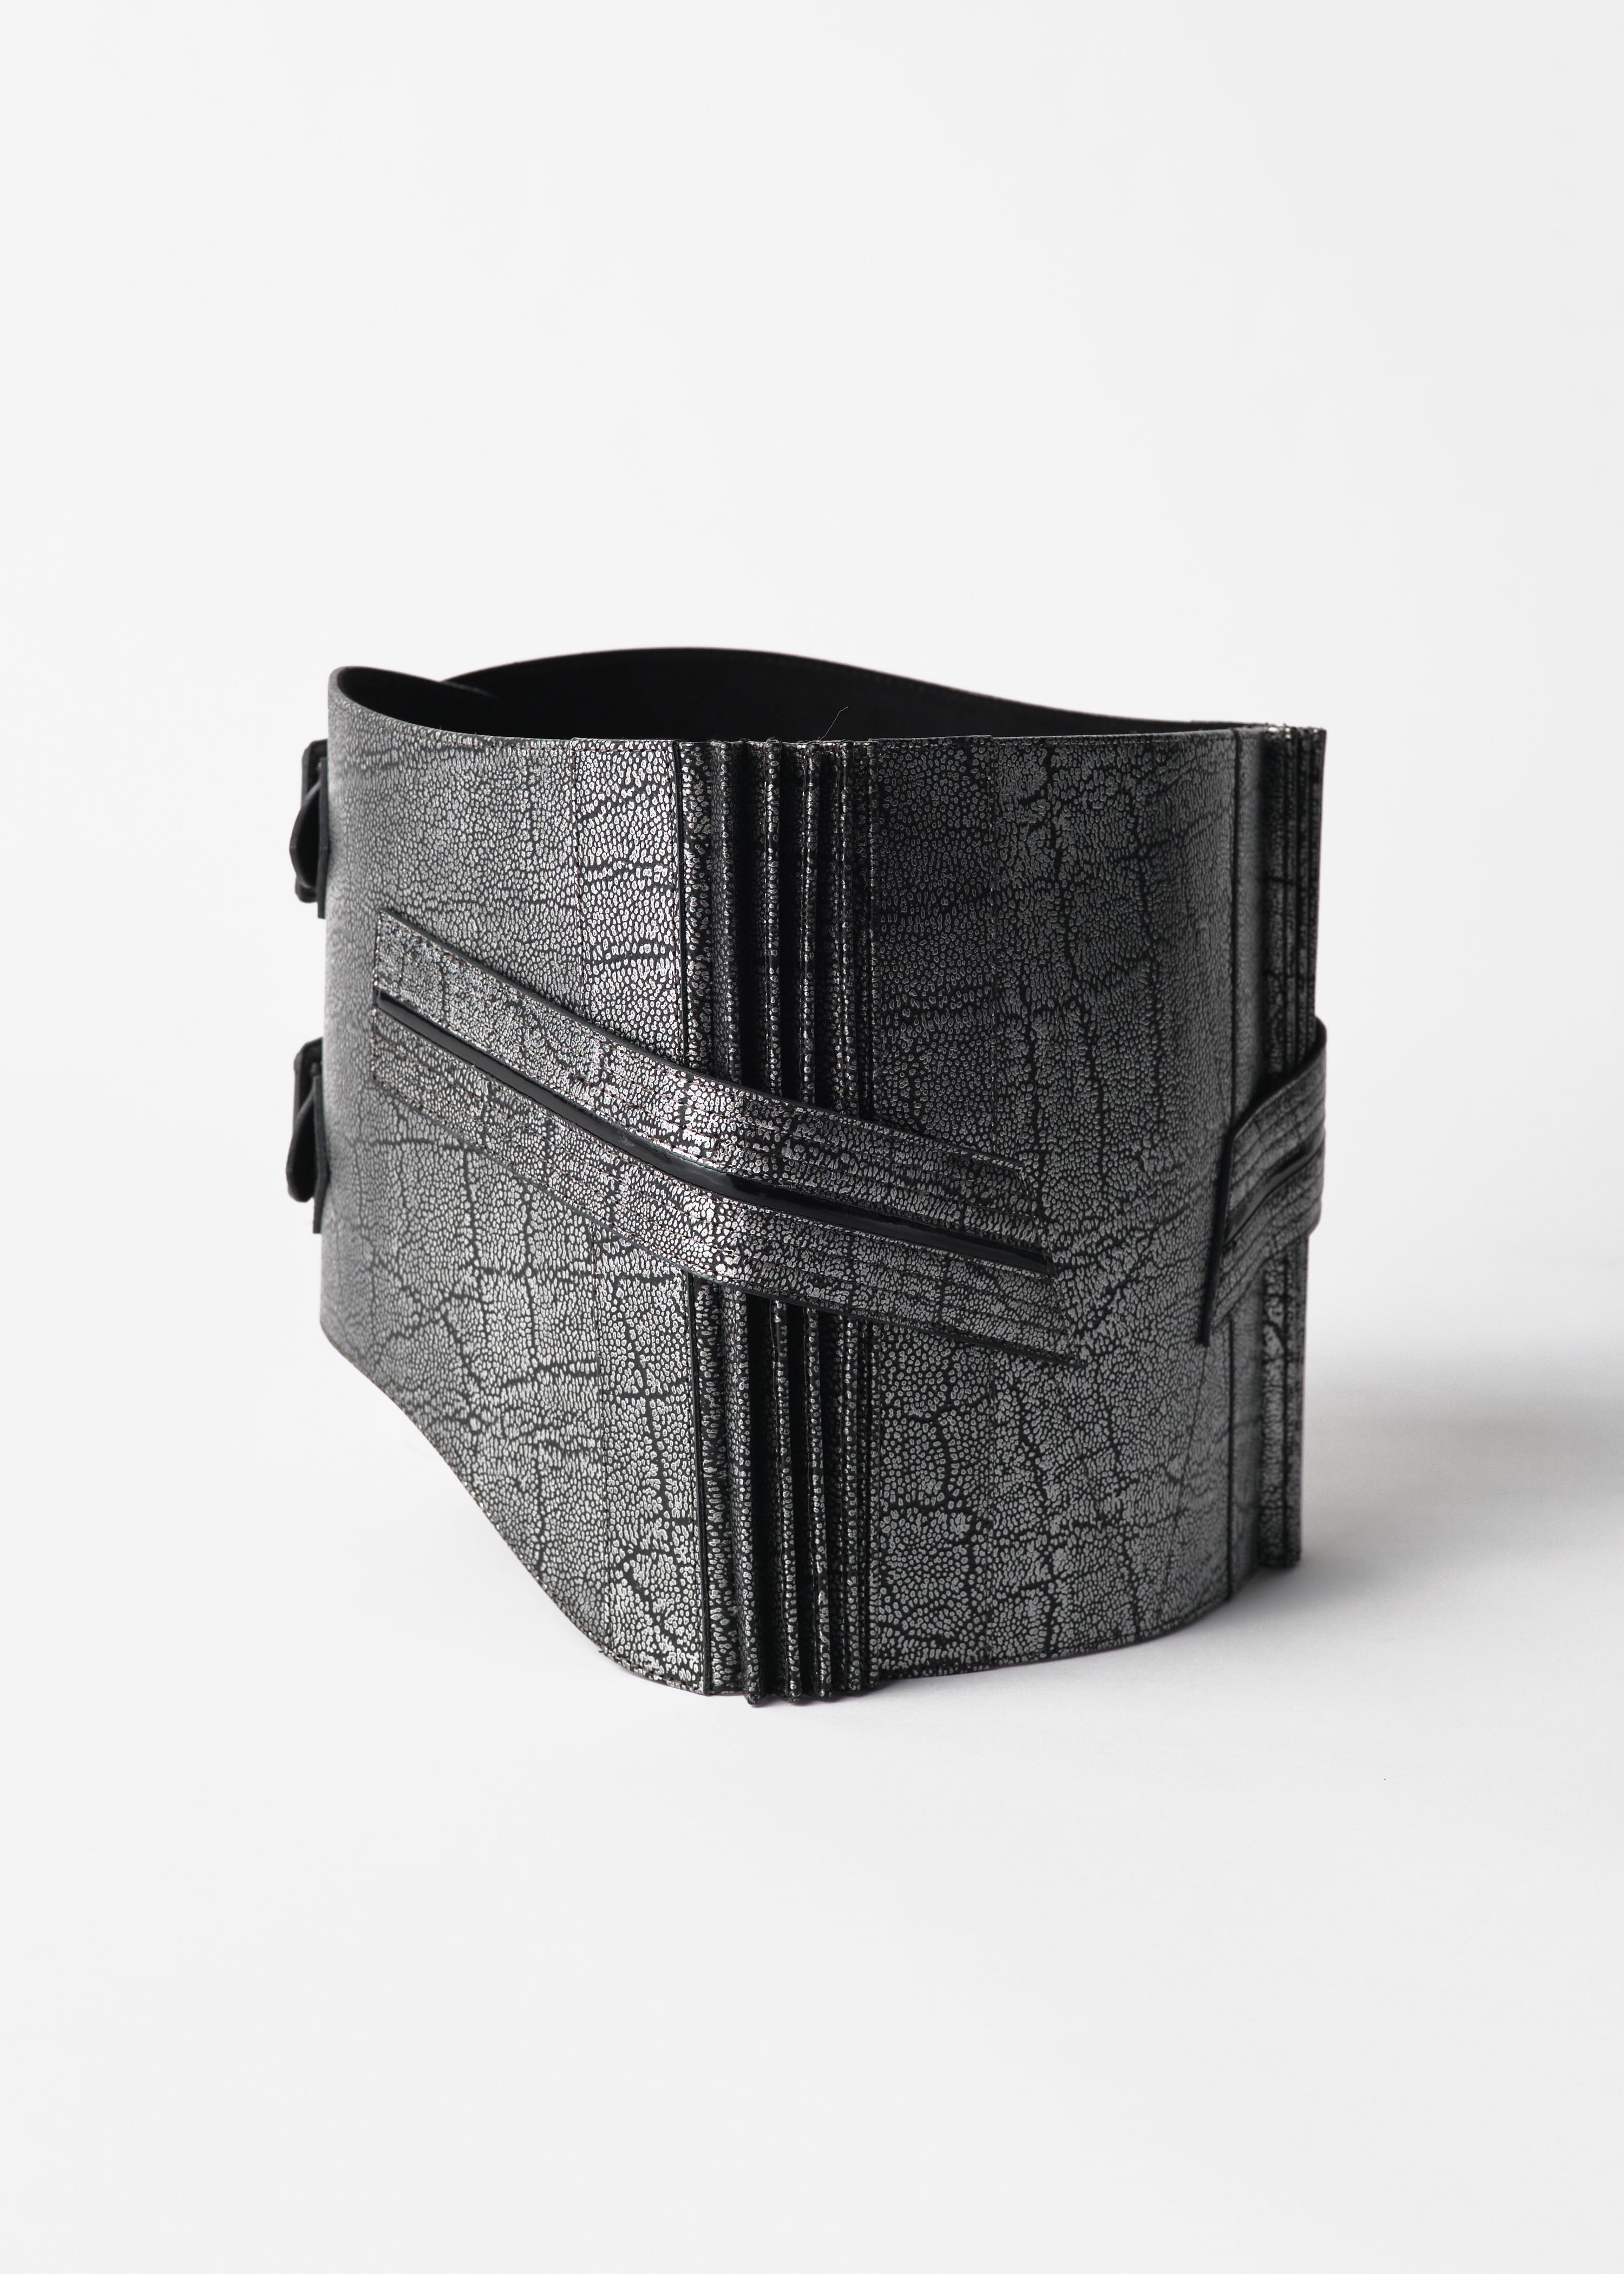 Obi belt "Elephant Silver" Leather [Immediate delivery available]